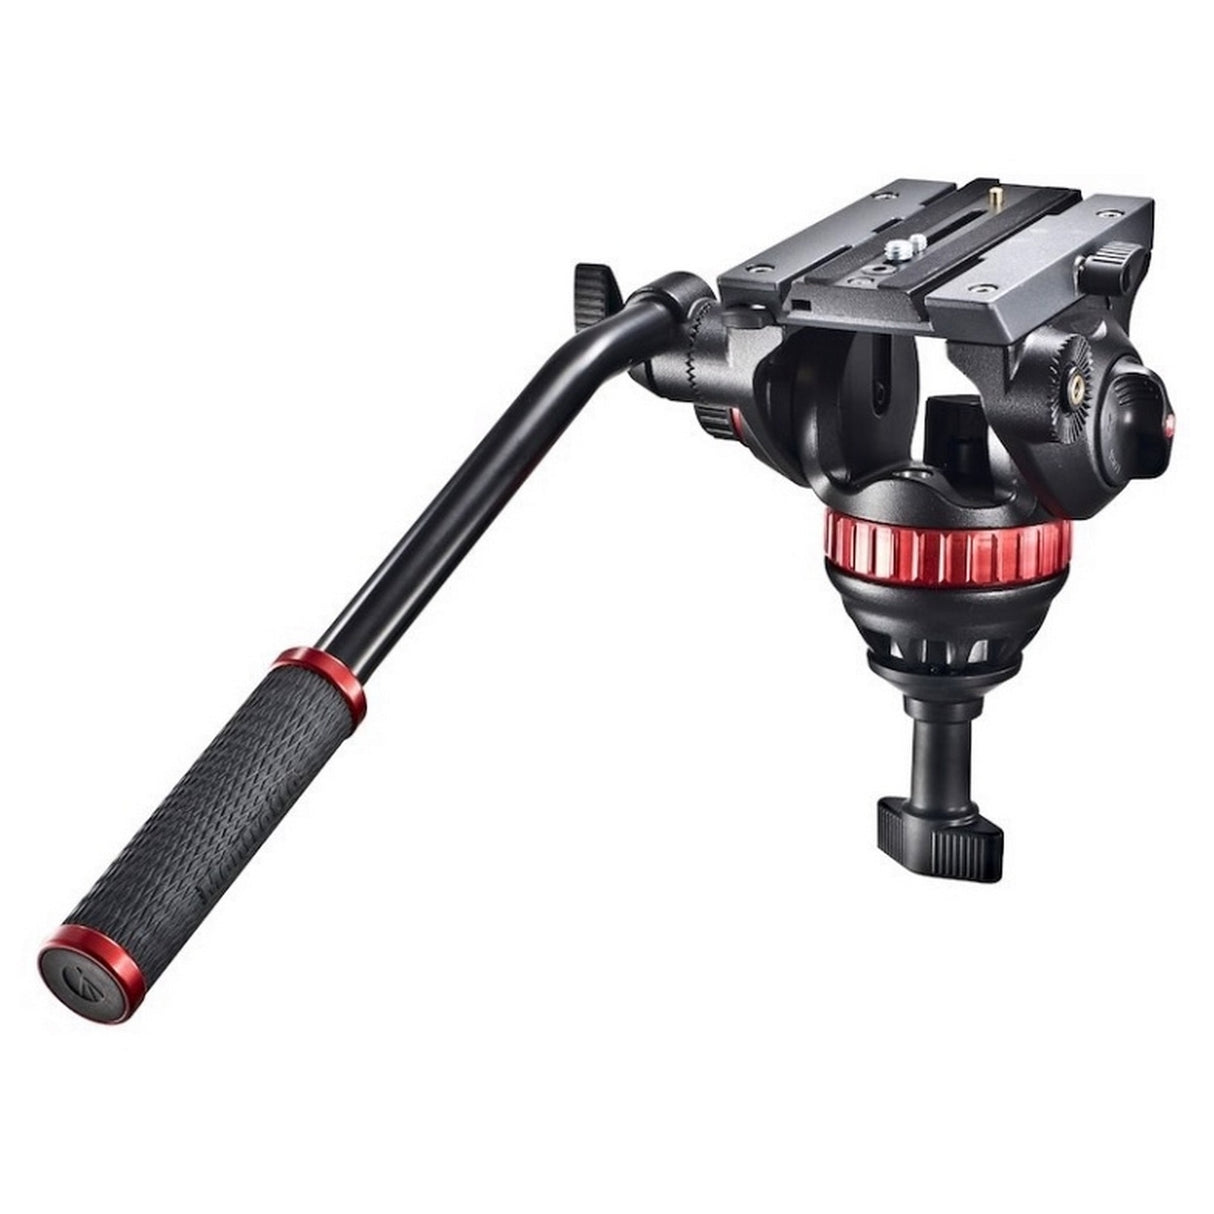 Manfrotto MVH502A 502 Fluid Video Head with 75mm Half Ball